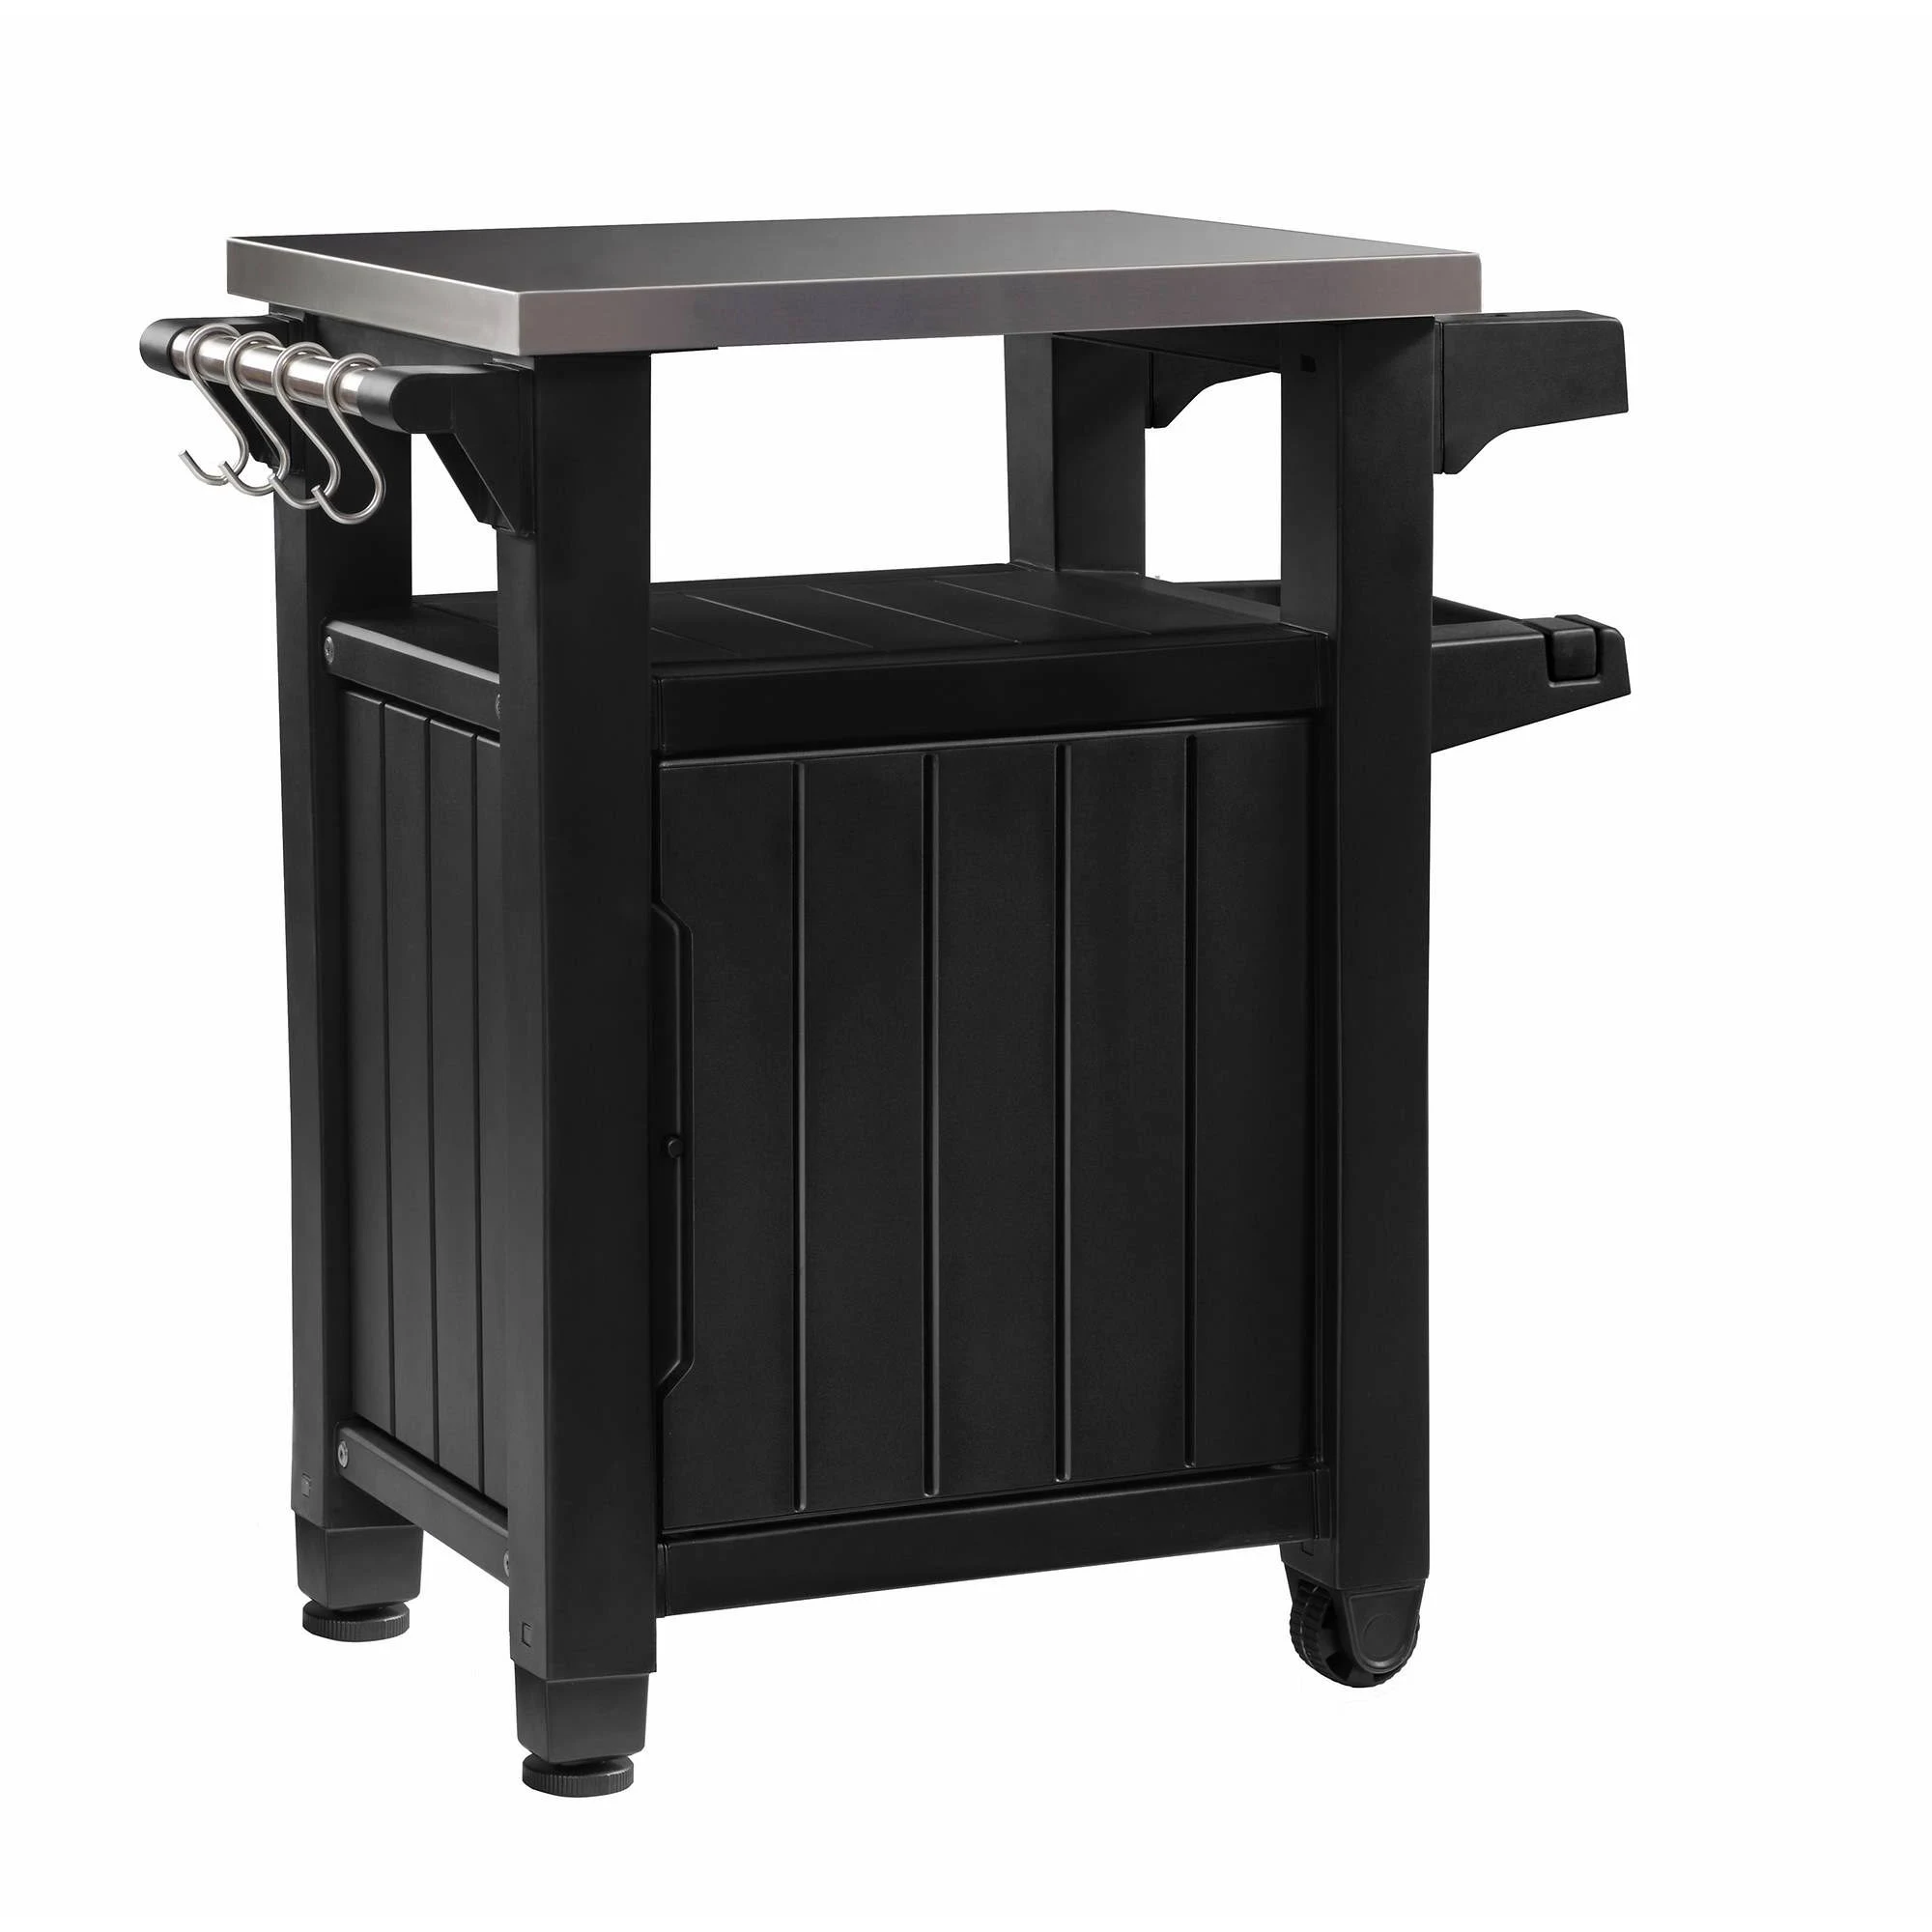 Outdoor Keter Unity BBQ Entertainment Storage Table and Prep Station